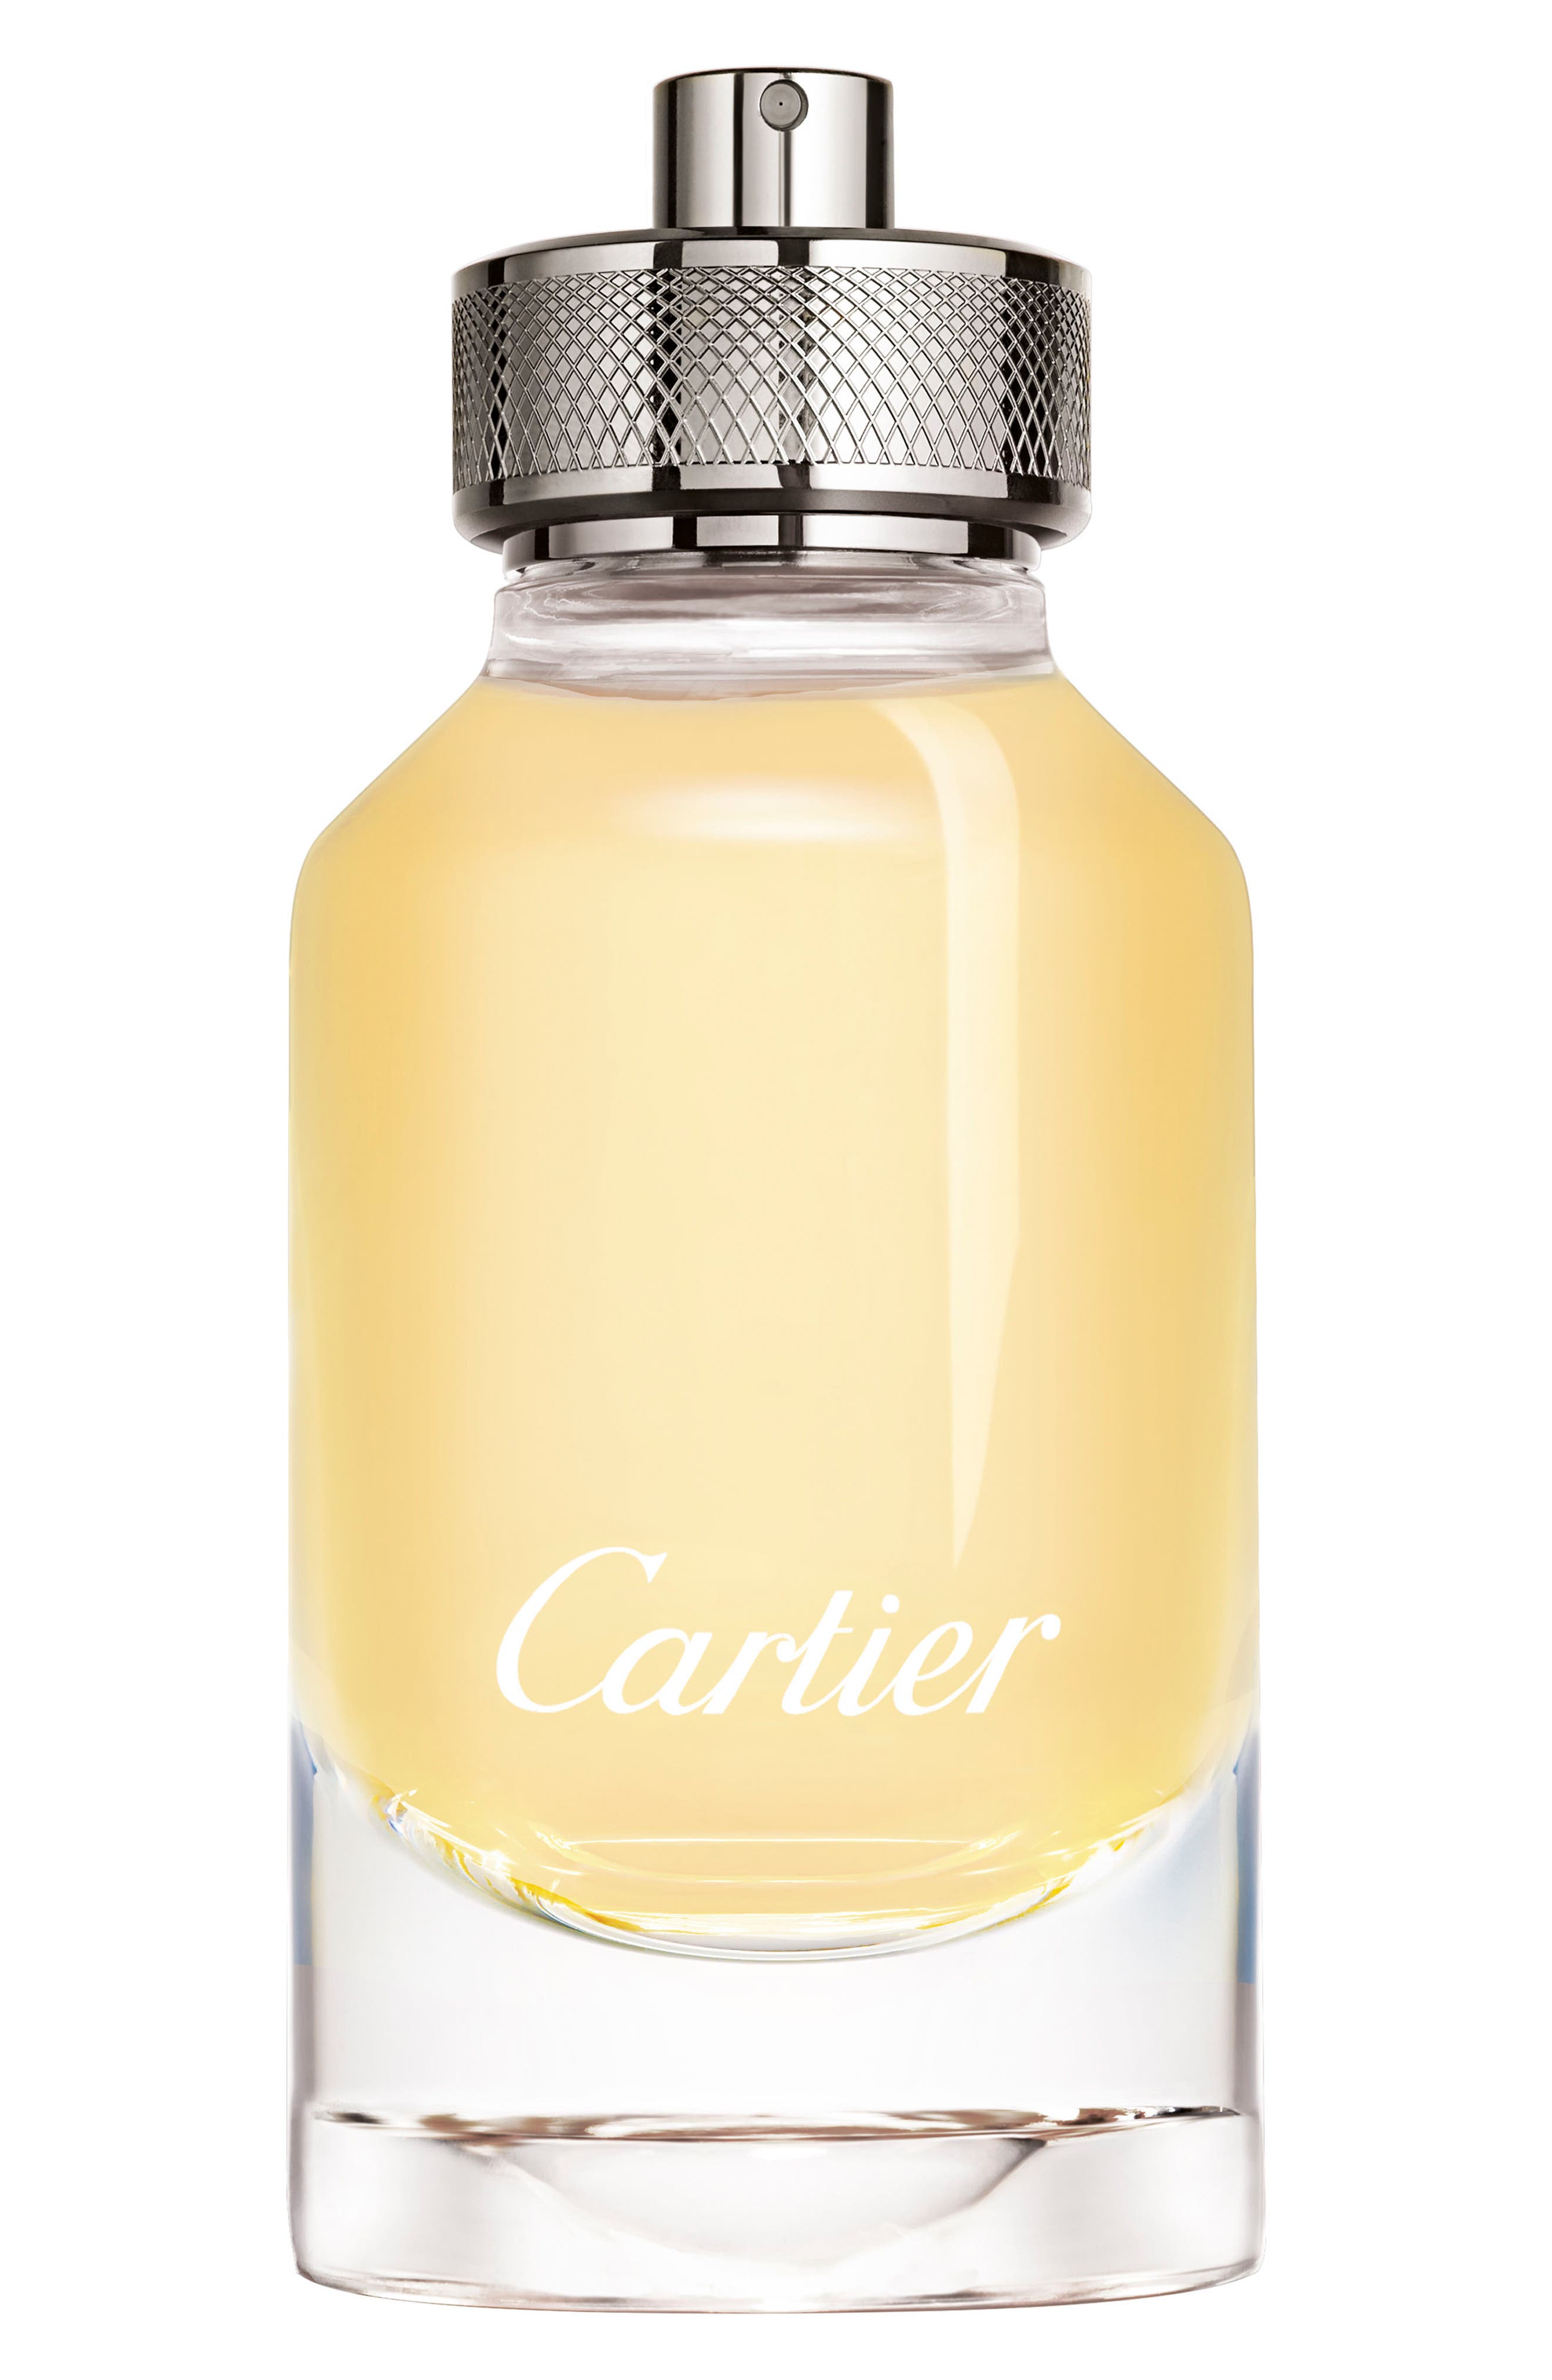 new cartier cologne